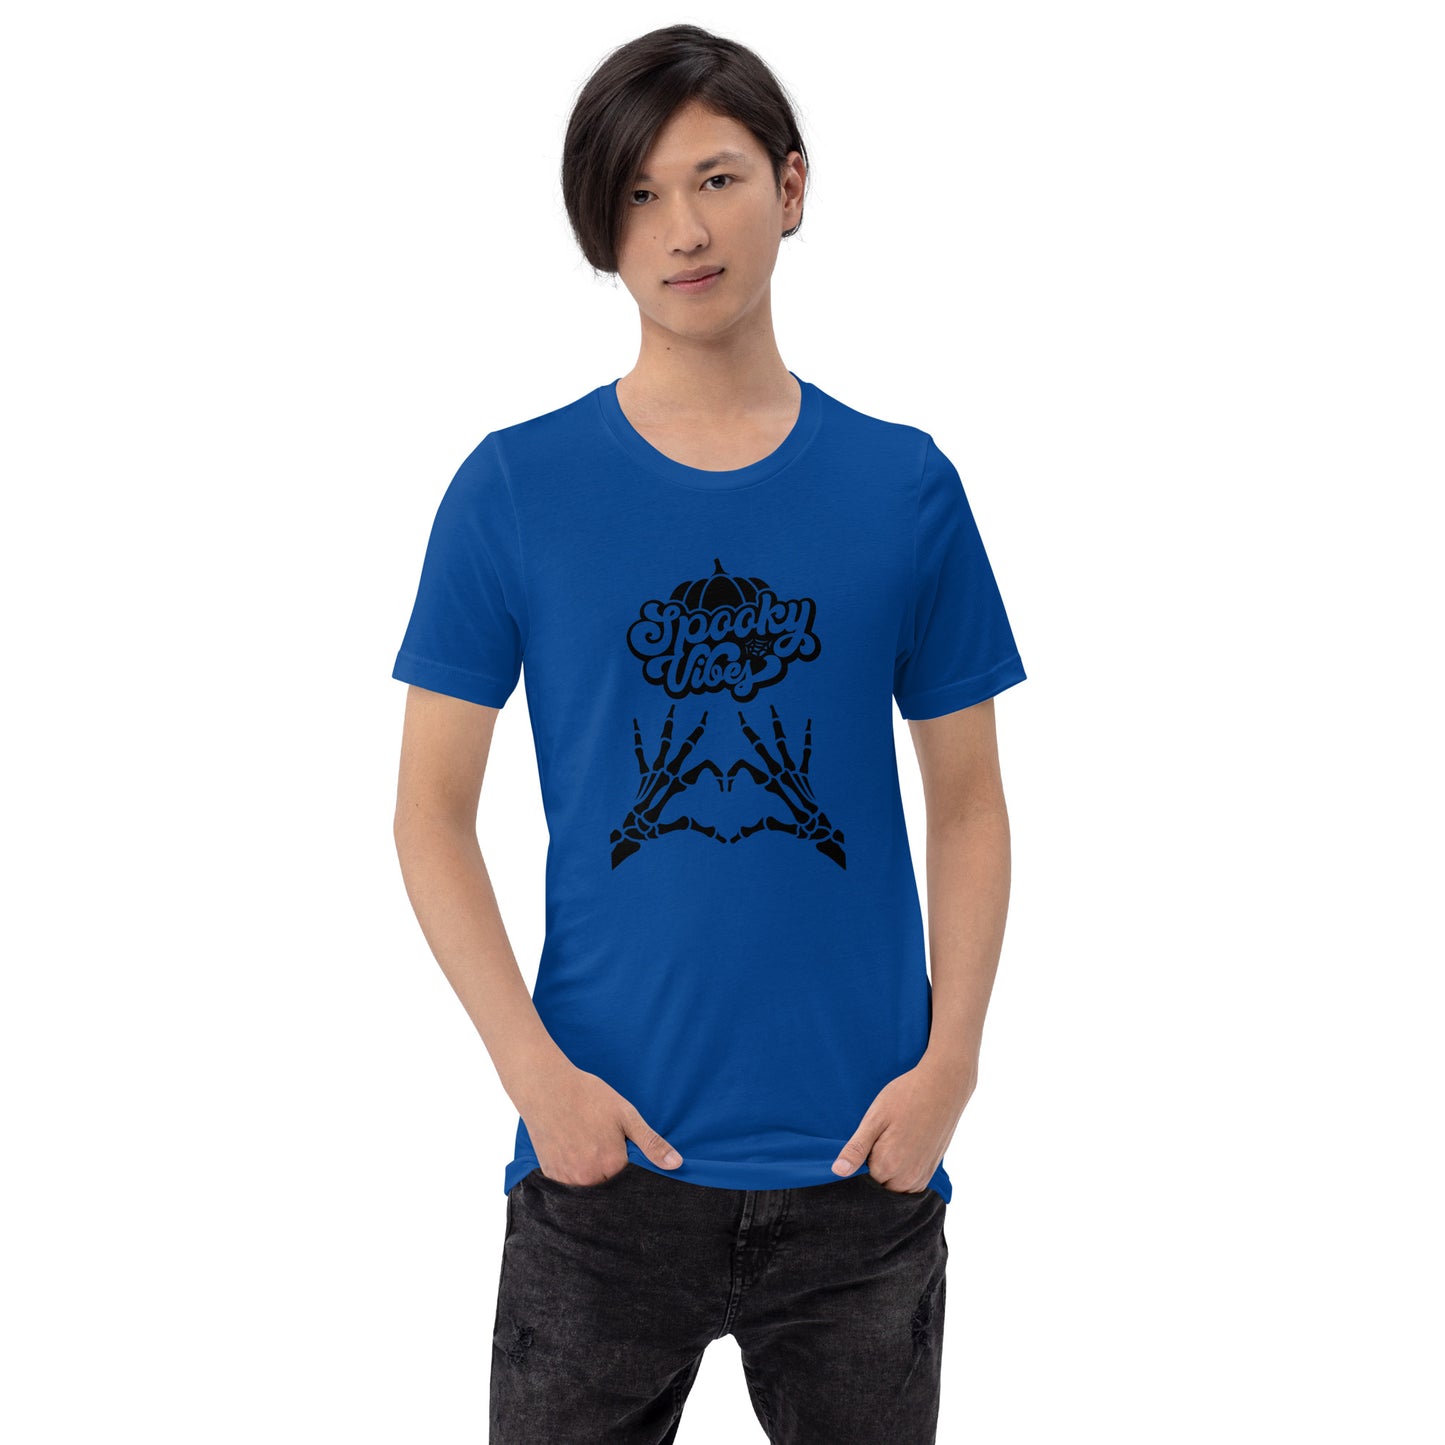 Spooky Vibes t-shirt